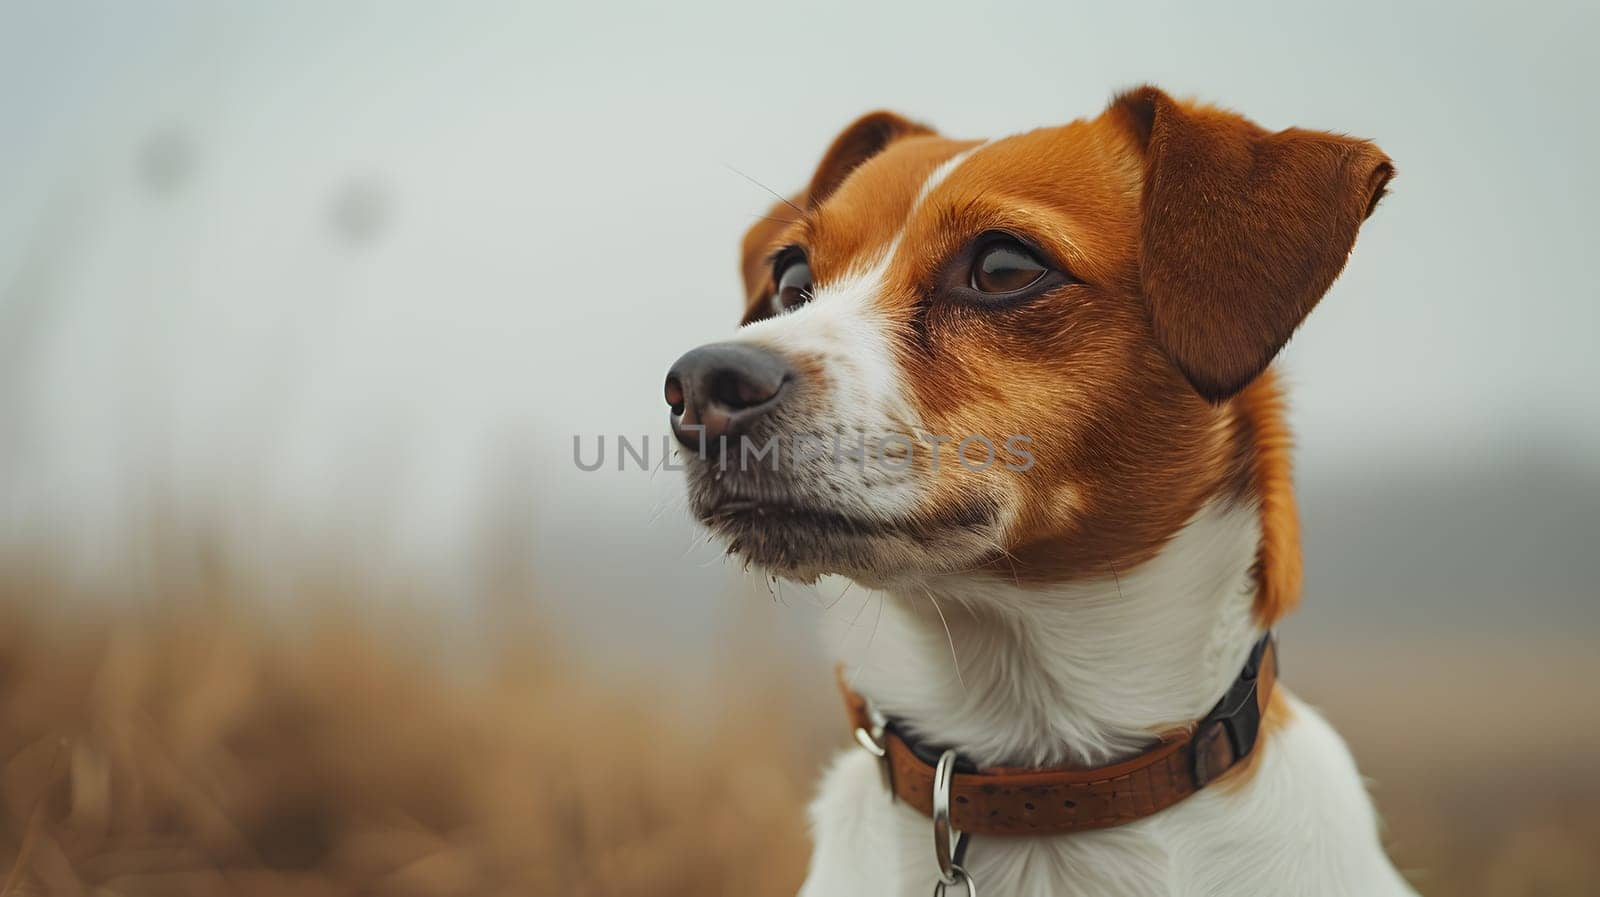 Close up of a fawn and white dog with whiskers, wearing a collar by Nadtochiy